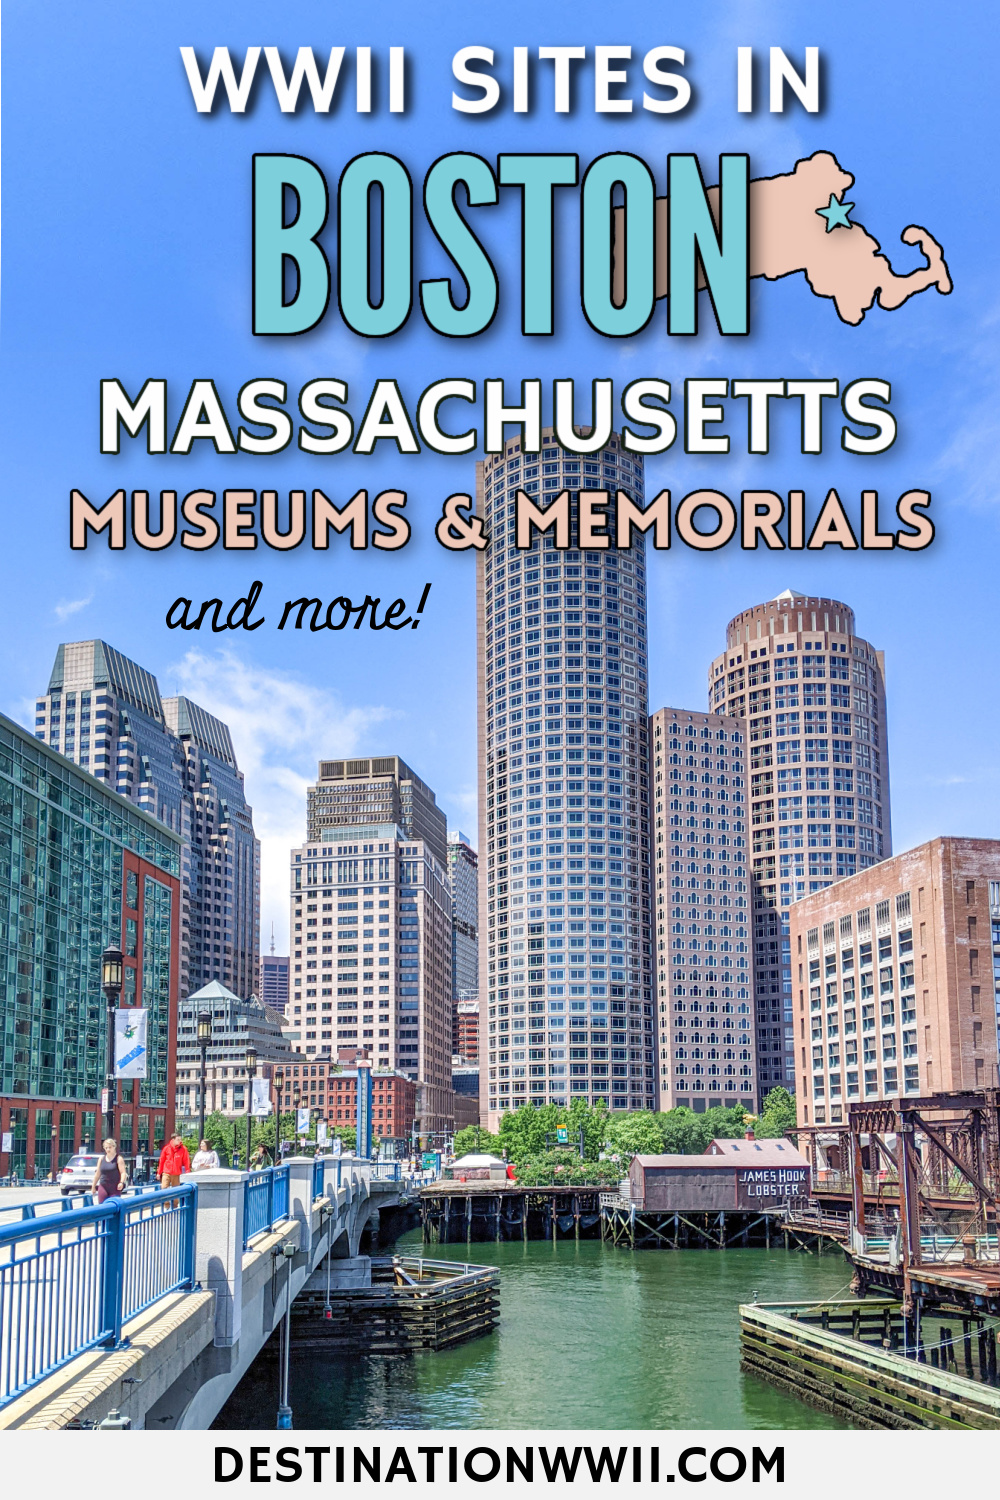 World War II sites in Boston, Massachusetts: Museums, memorials, monuments, forts, and more / Holocaust Memorial, military museums, battleships, Boston Harbor Islands forts, victory gardens